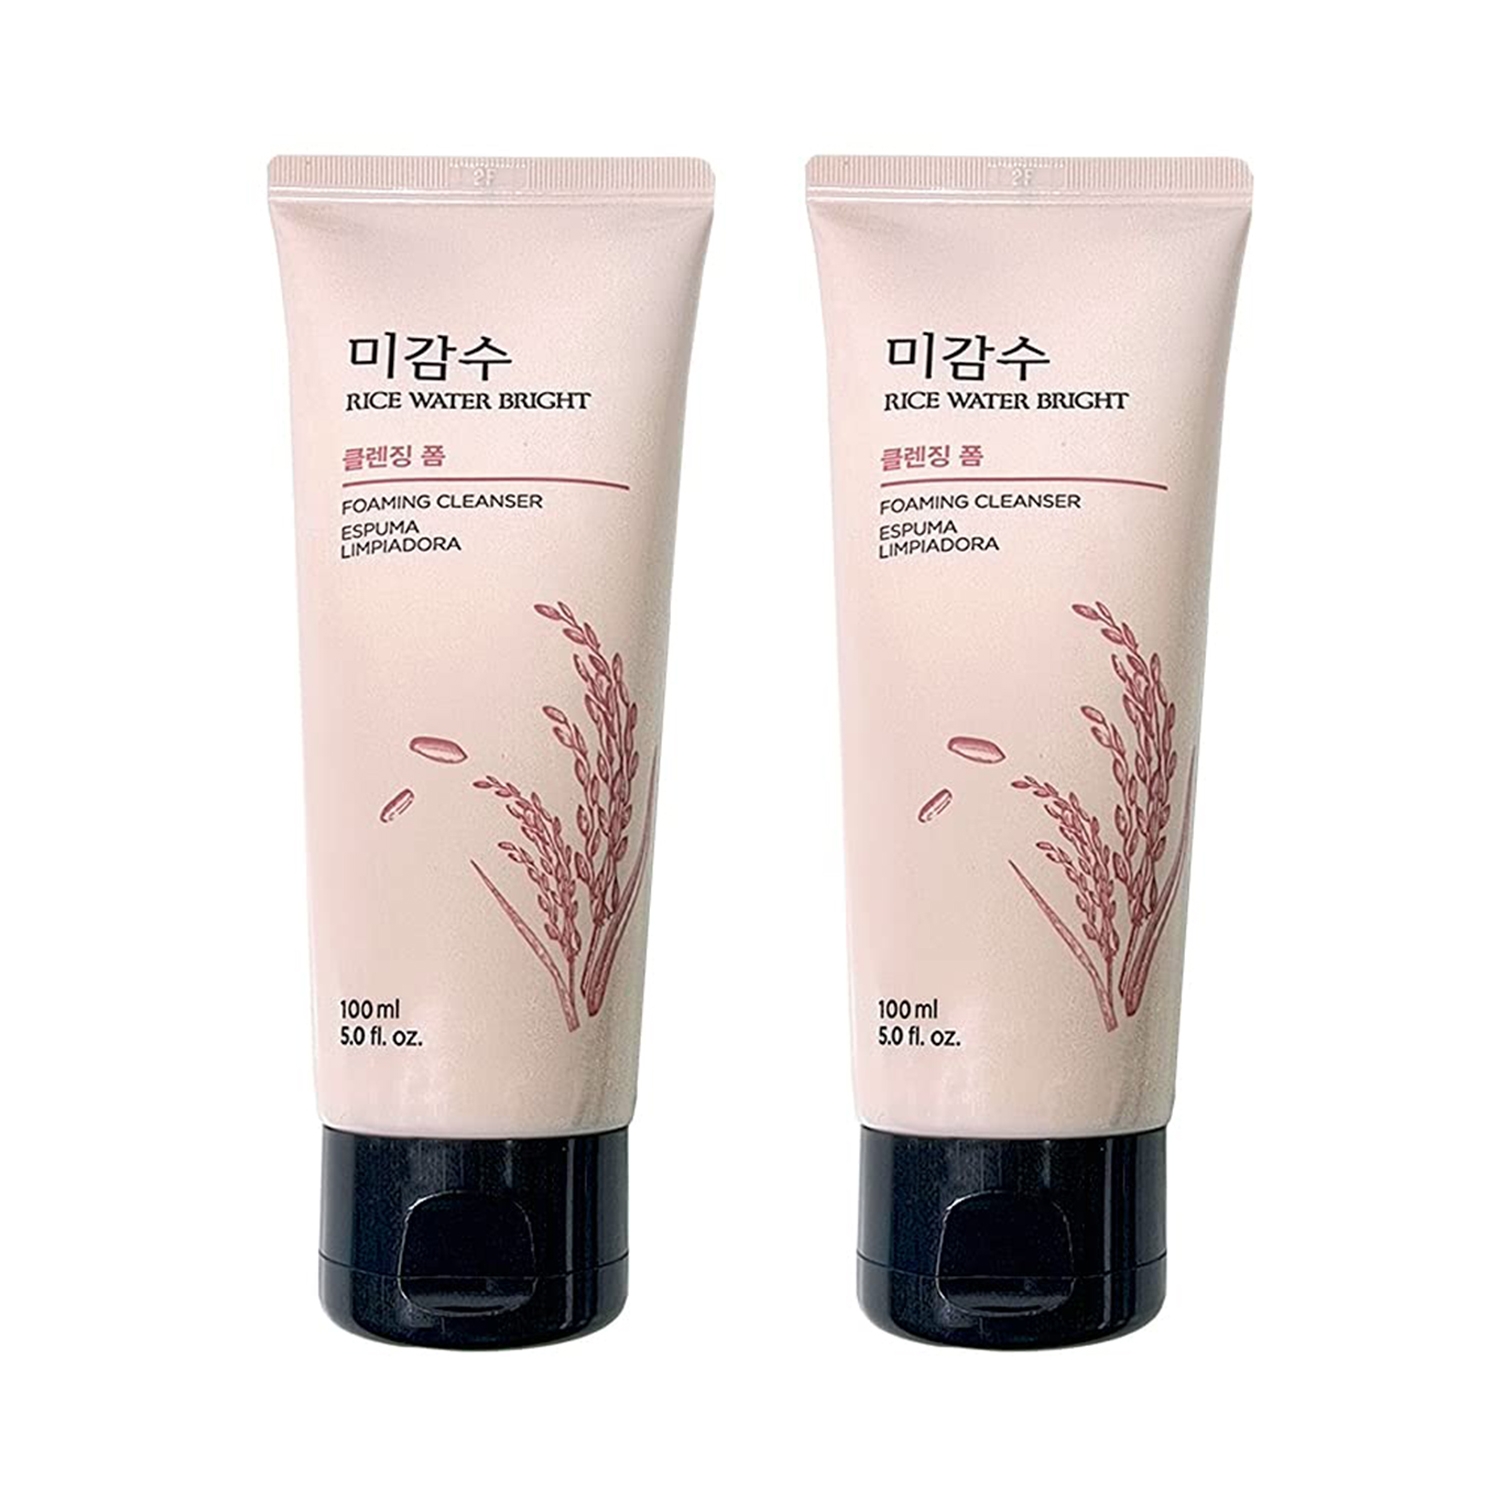 The Face Shop | The Face Shop Rice Water Bright Cleansing Foam - Pack of 2 (100ml Each)